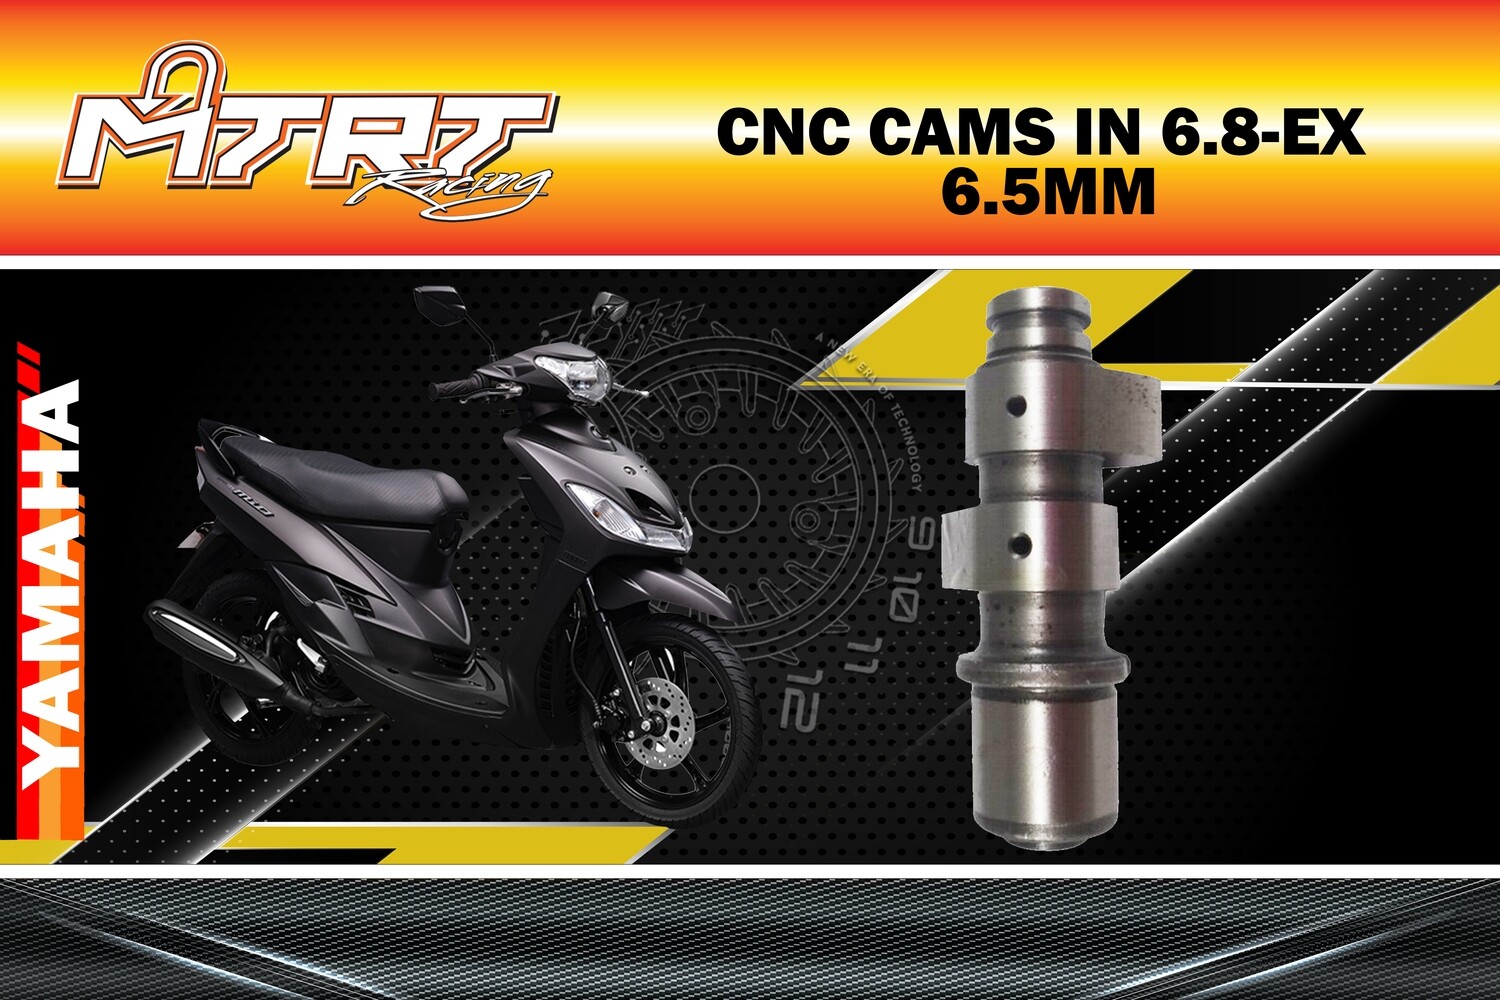 CNC CAMS IN 6.8-EX 6.5MM MIO MTRT